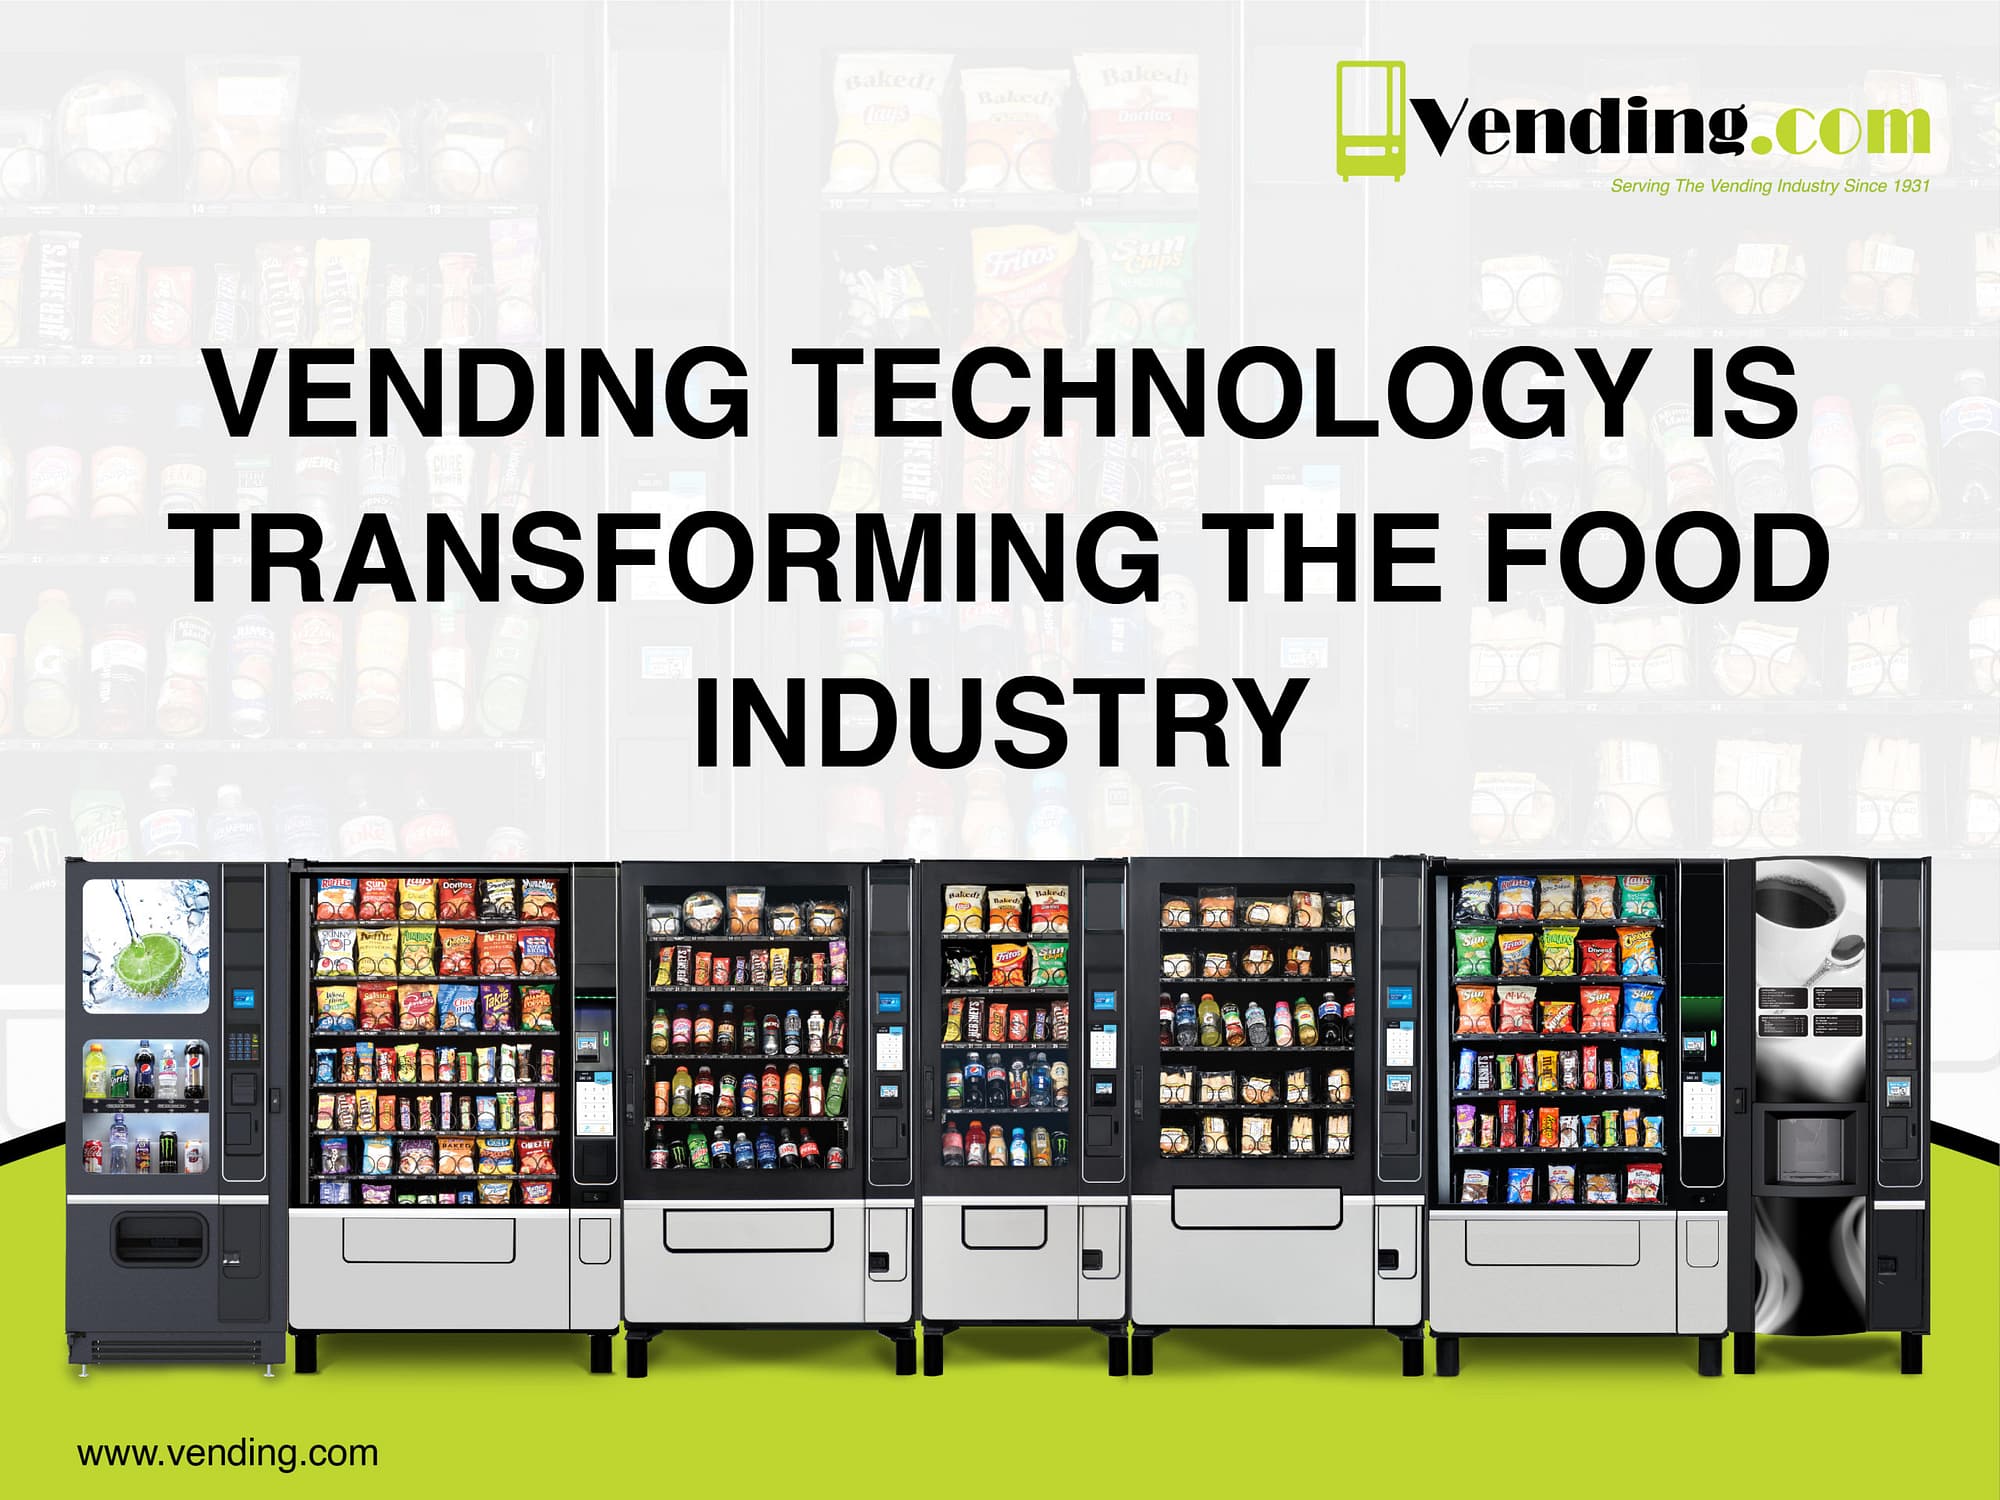 Vending.com - Vending technology is transforming the food industry